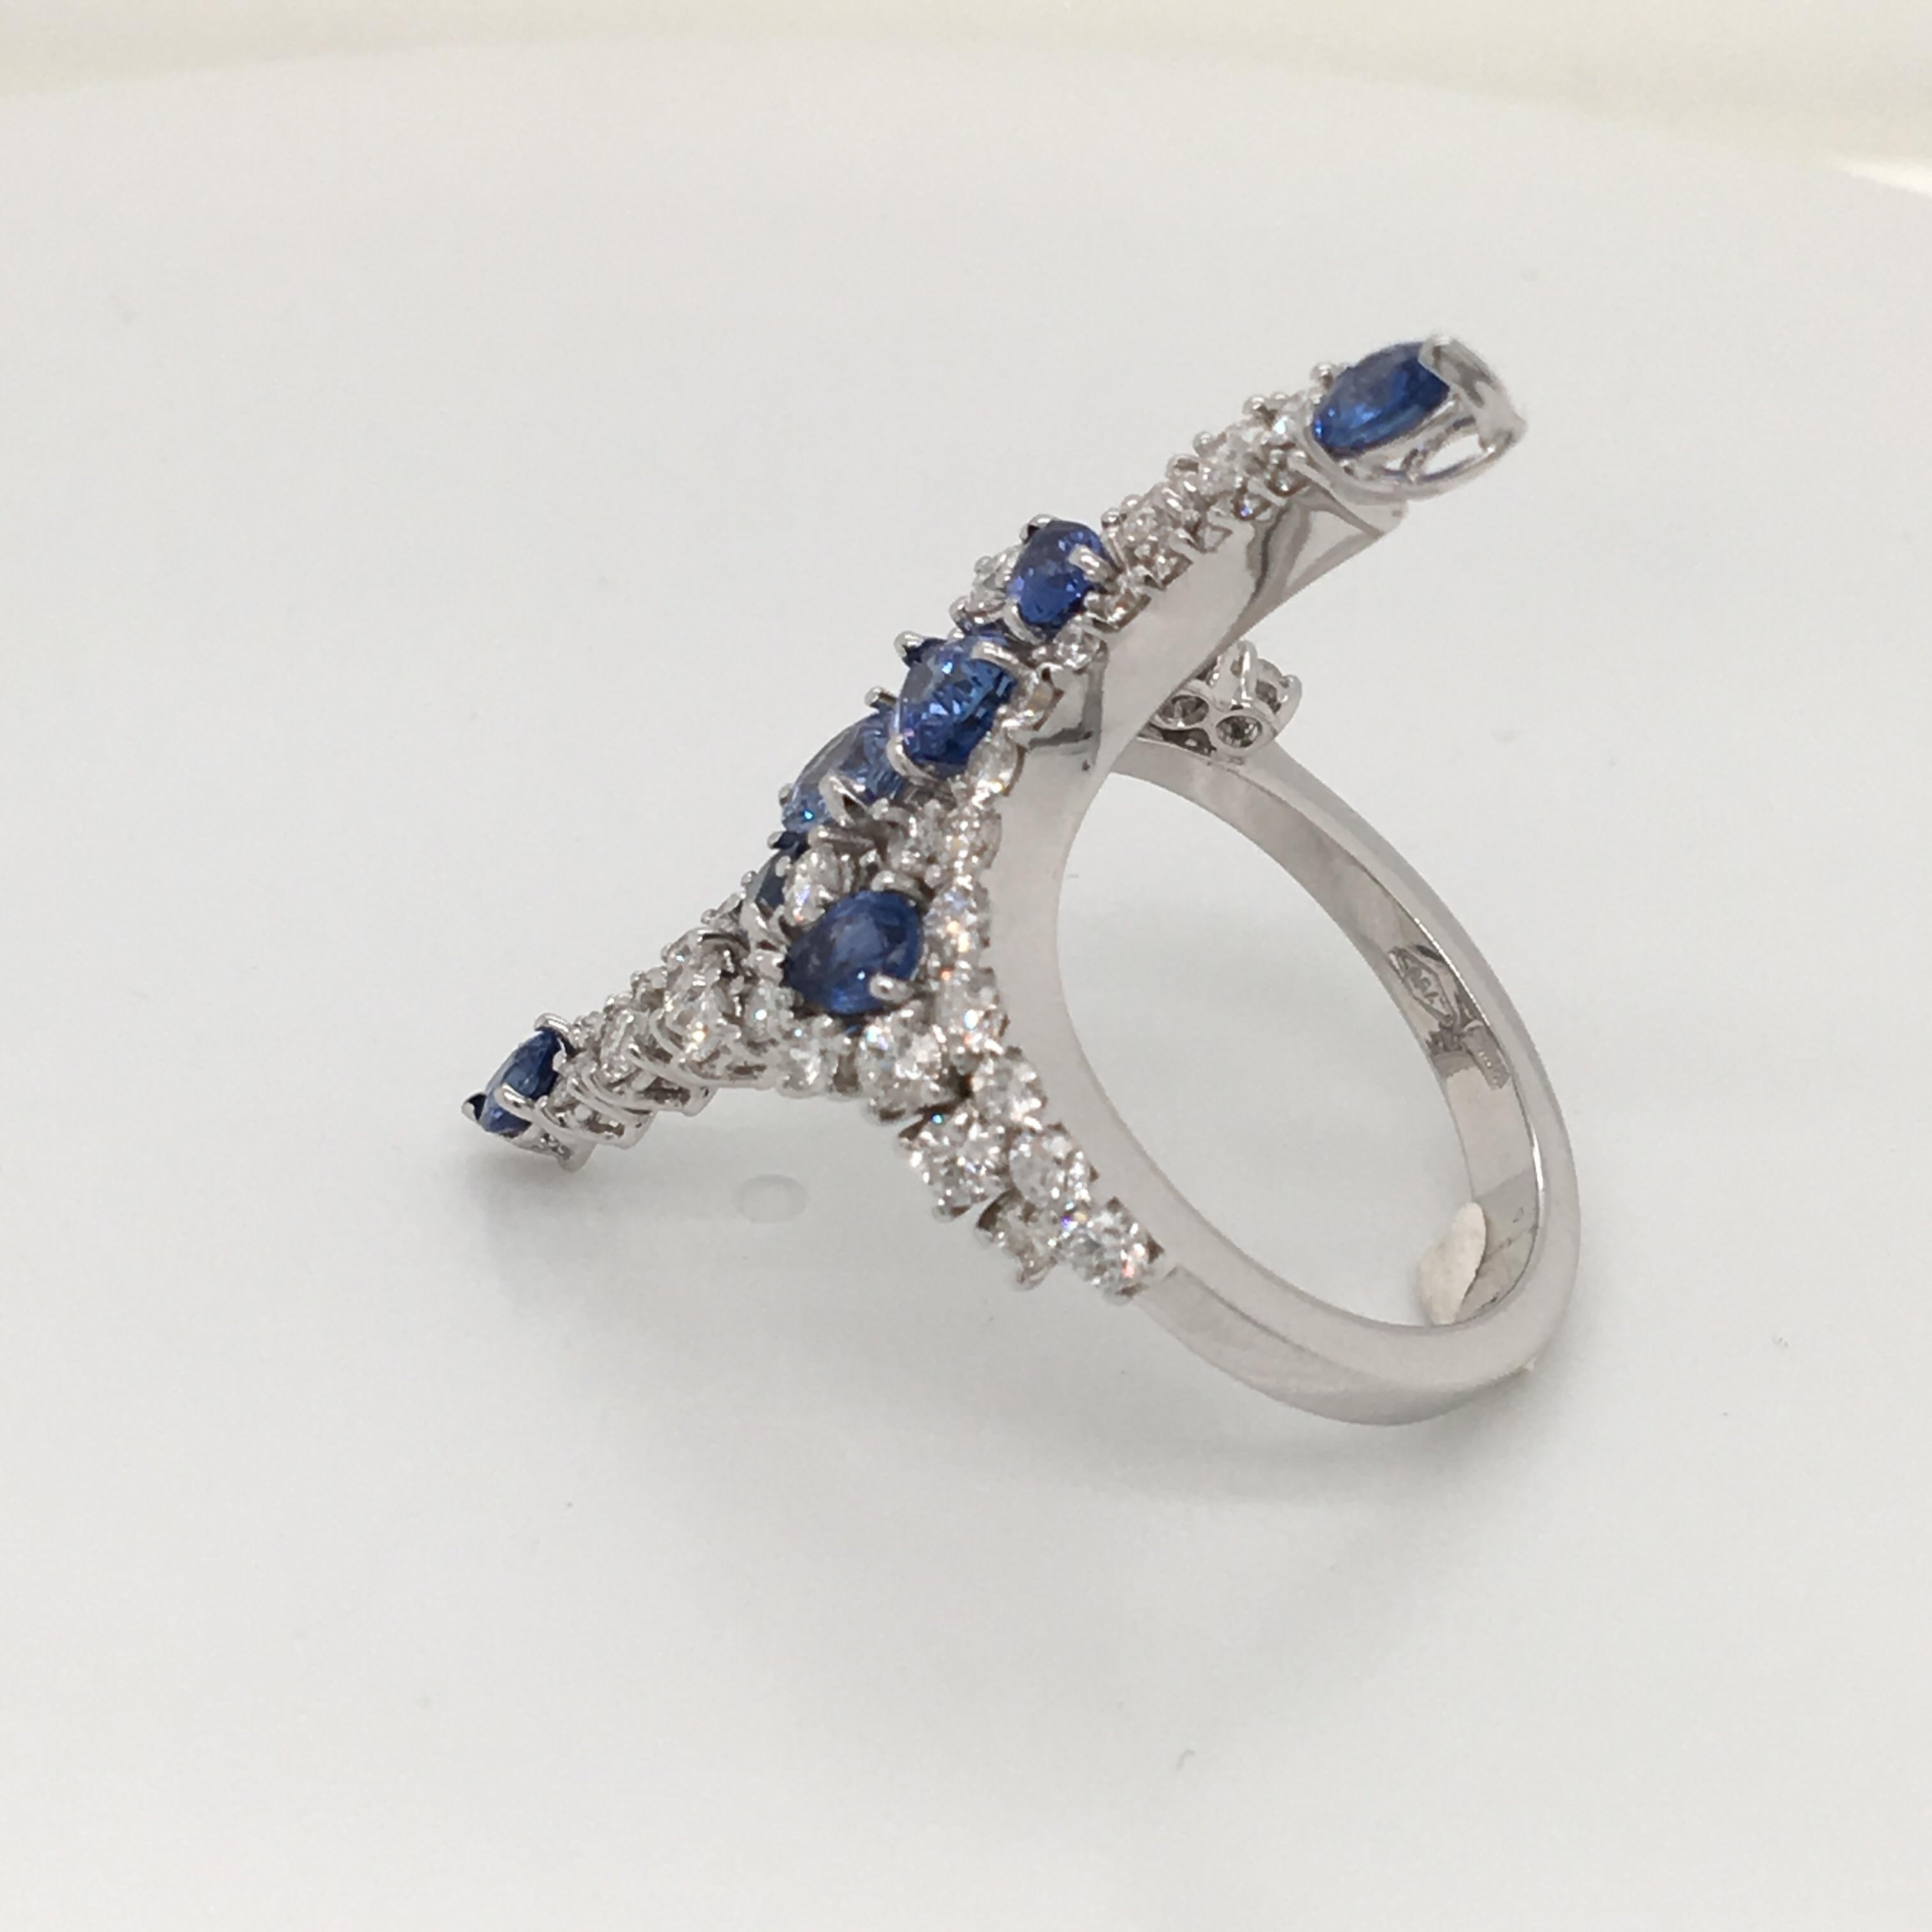 2.07 Carat Blue Sapphire and 1.53 Carat Diamonds Fashion Long White Gold Ring For Sale 3